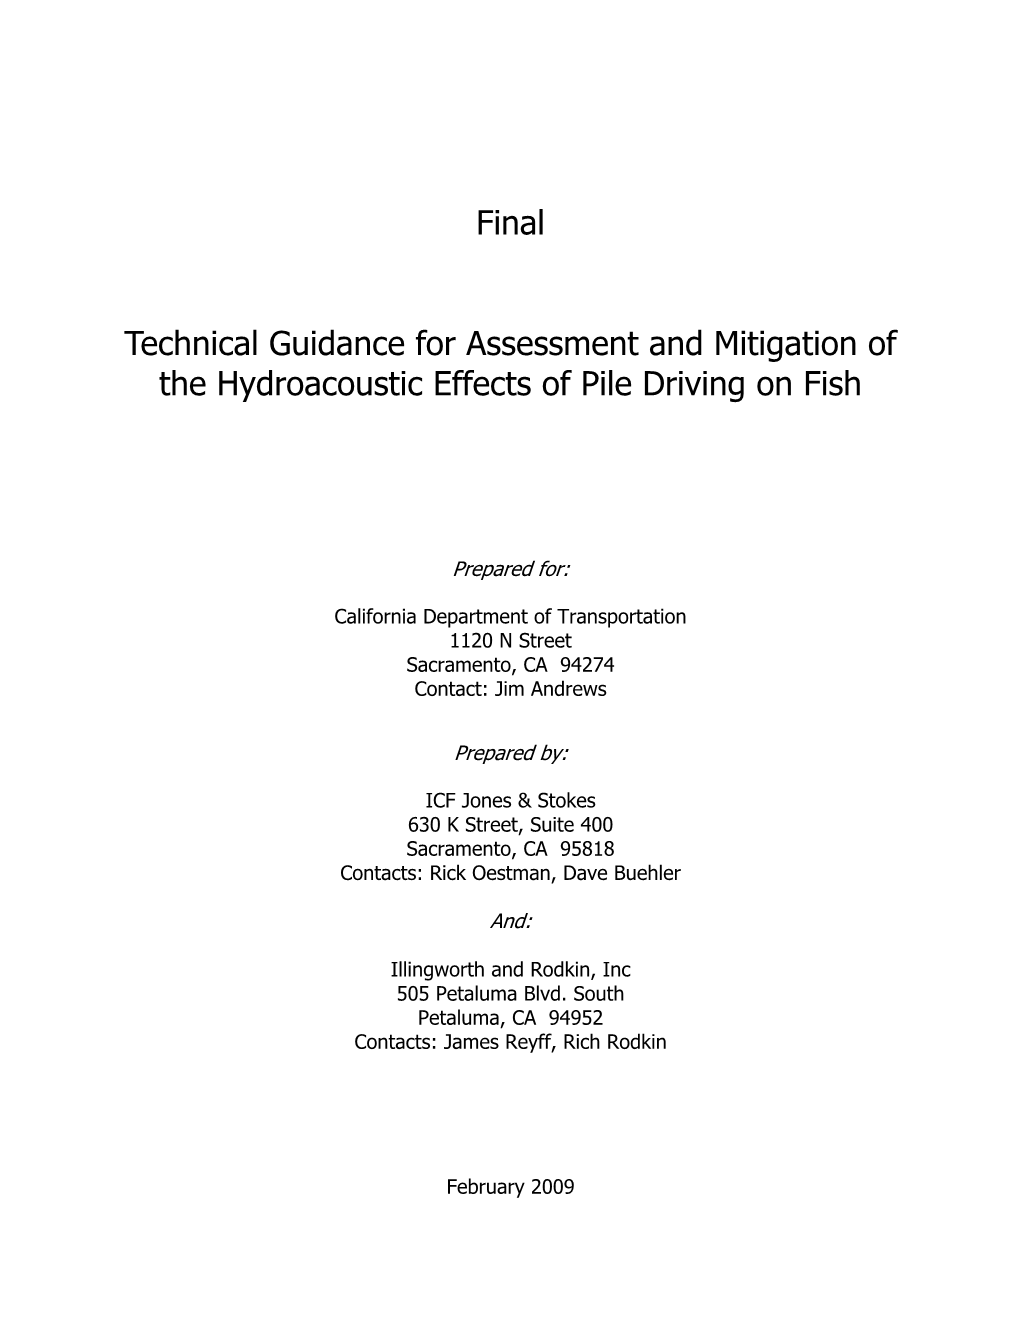 Technical Guidance for Assessment and Mitigation of the Hydroacoustic Effects of Pile Driving on Fish